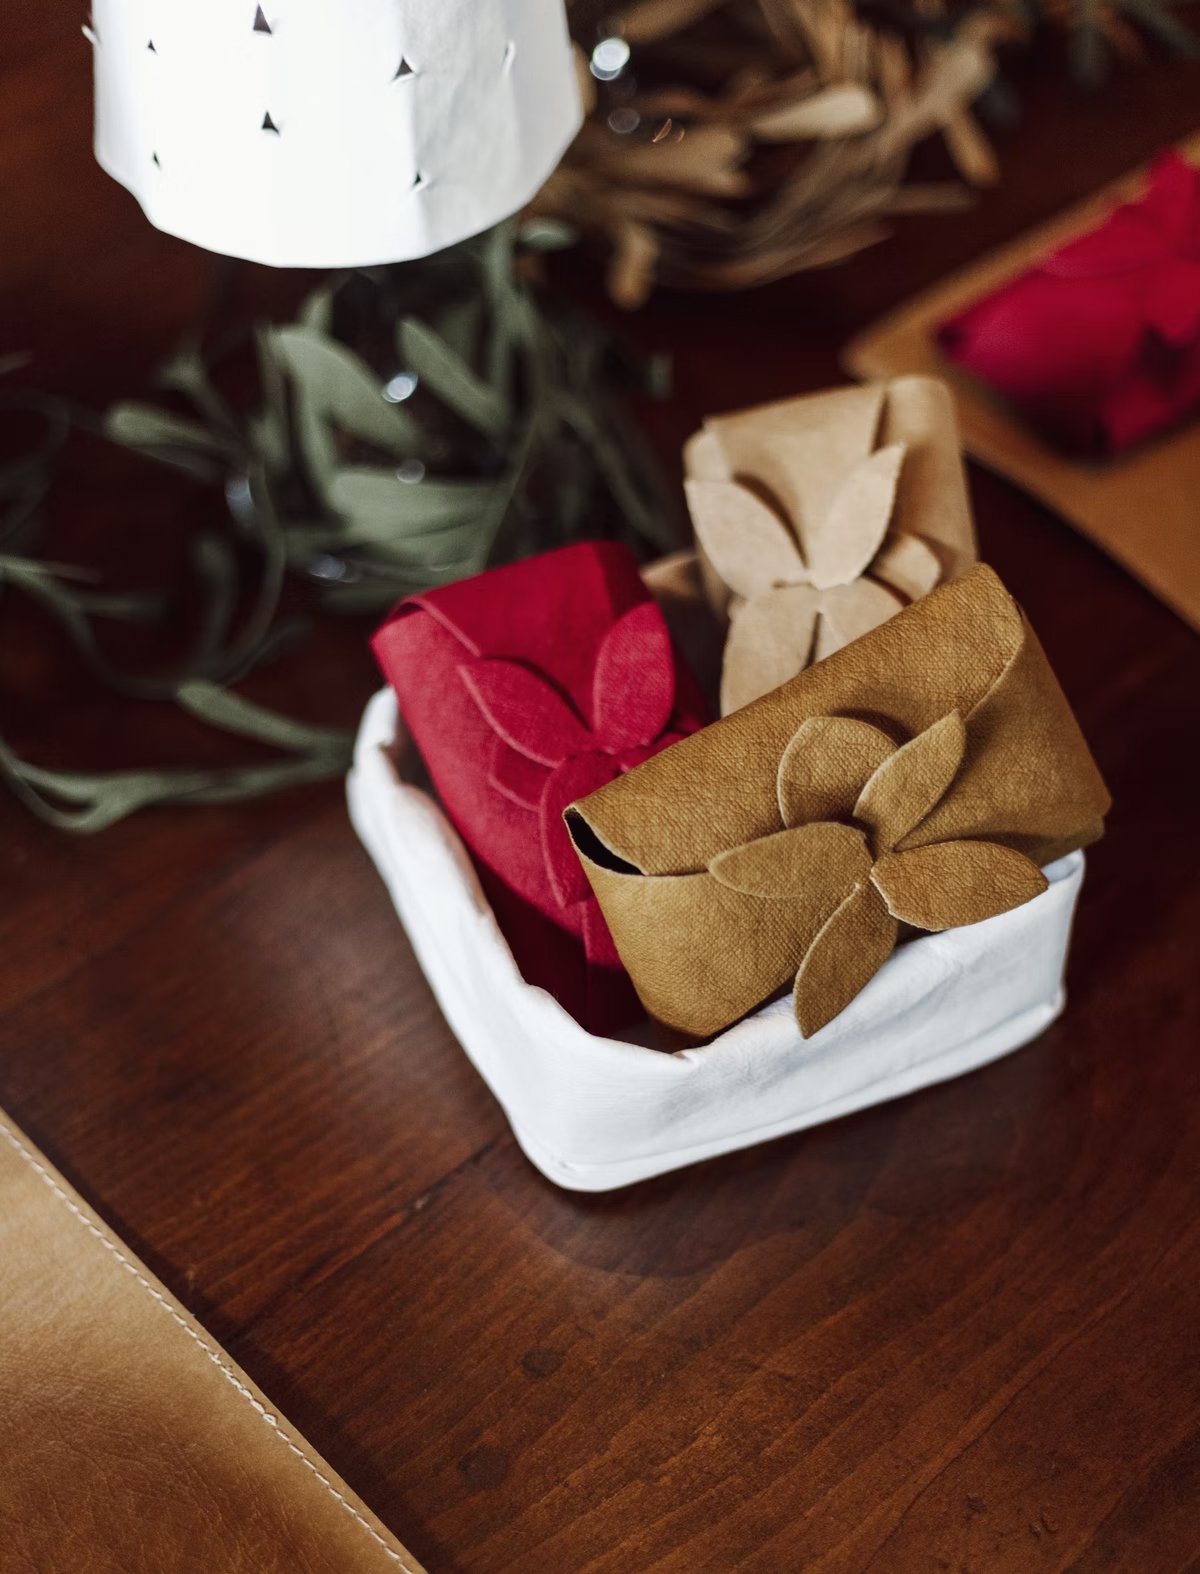 A washable paper tray is shown on a a wooden table. Inside the tray are three washable paper soap holders in red, tan and cream. The soap holders are shown closed with flower petal folded closures.